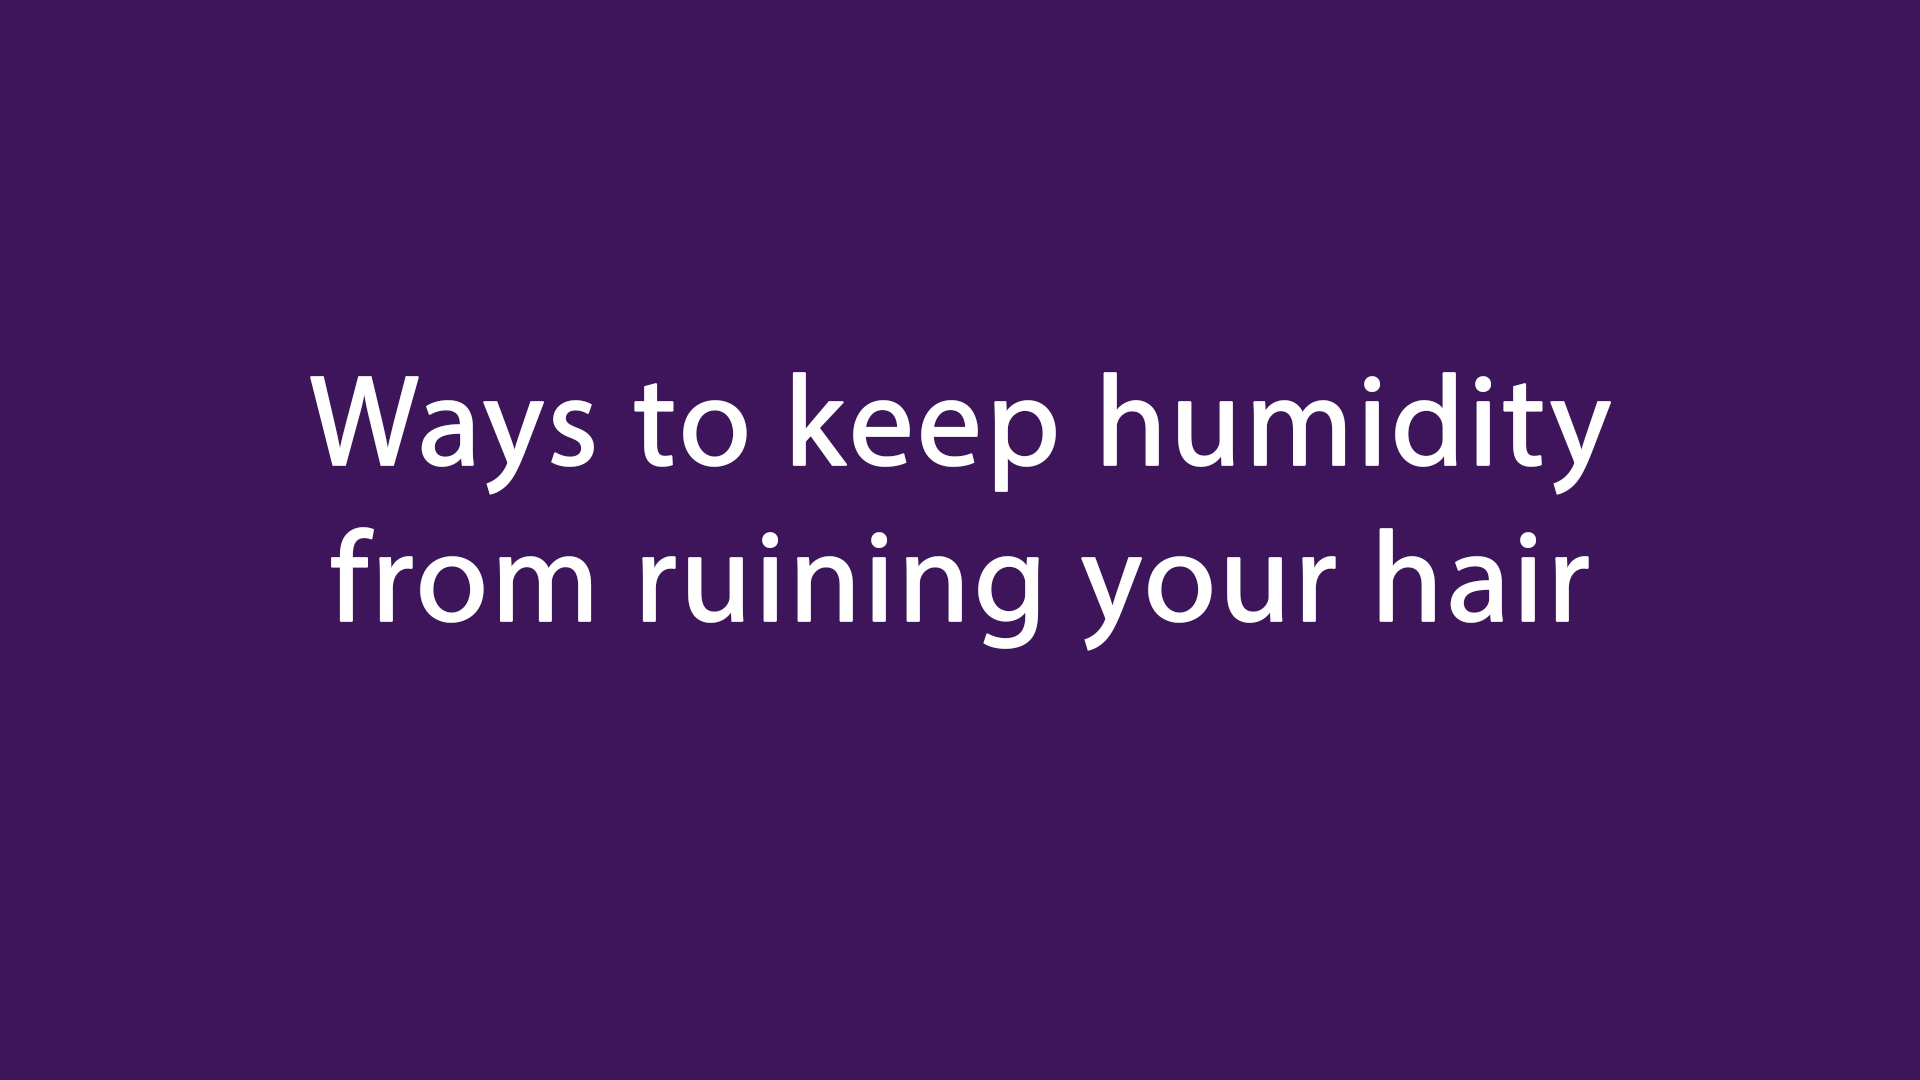 Ways to keep humidity from ruining your hair